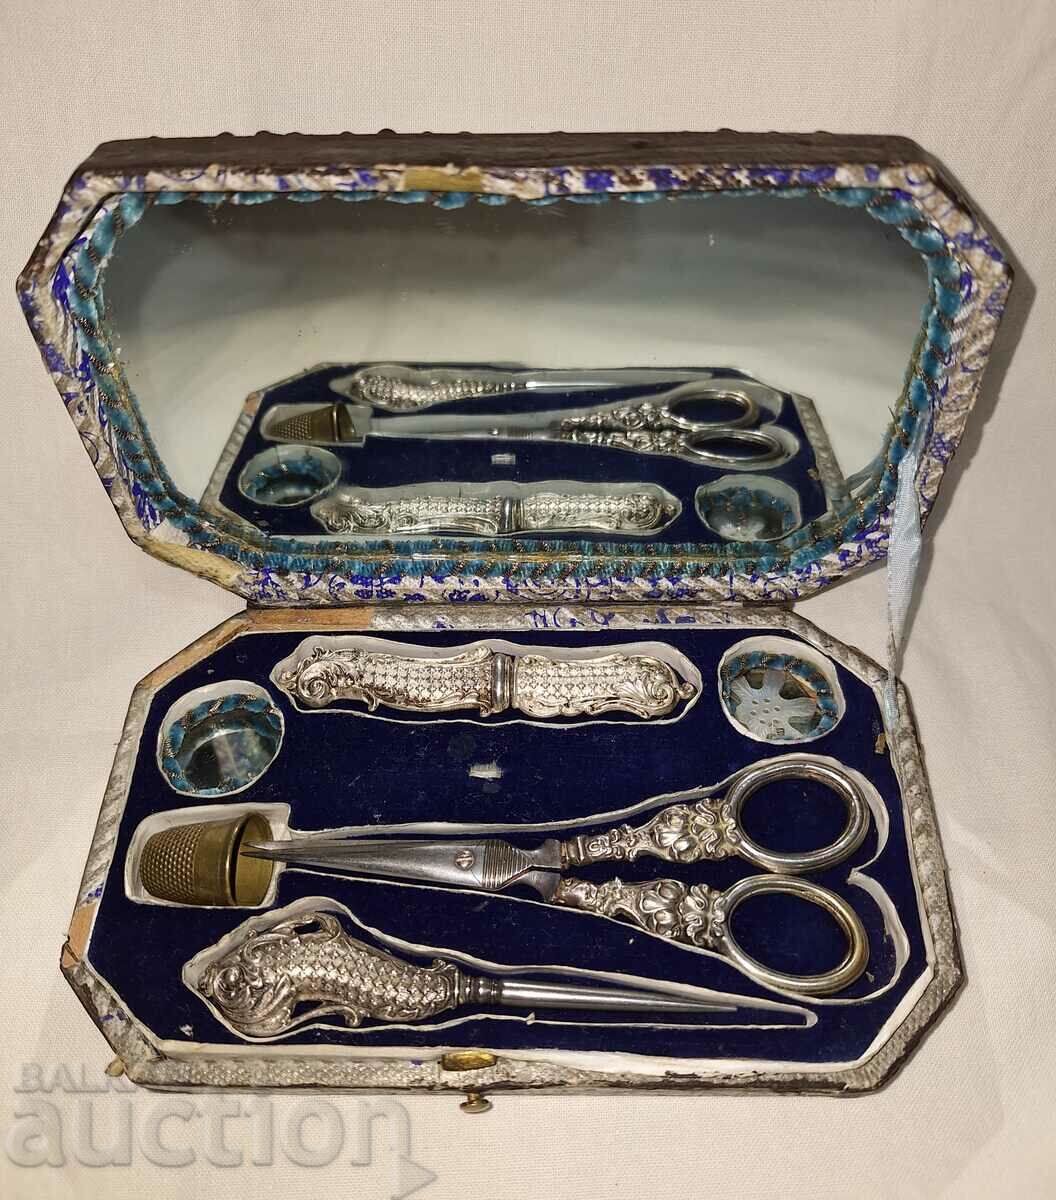 Vintage sewing kit in a box